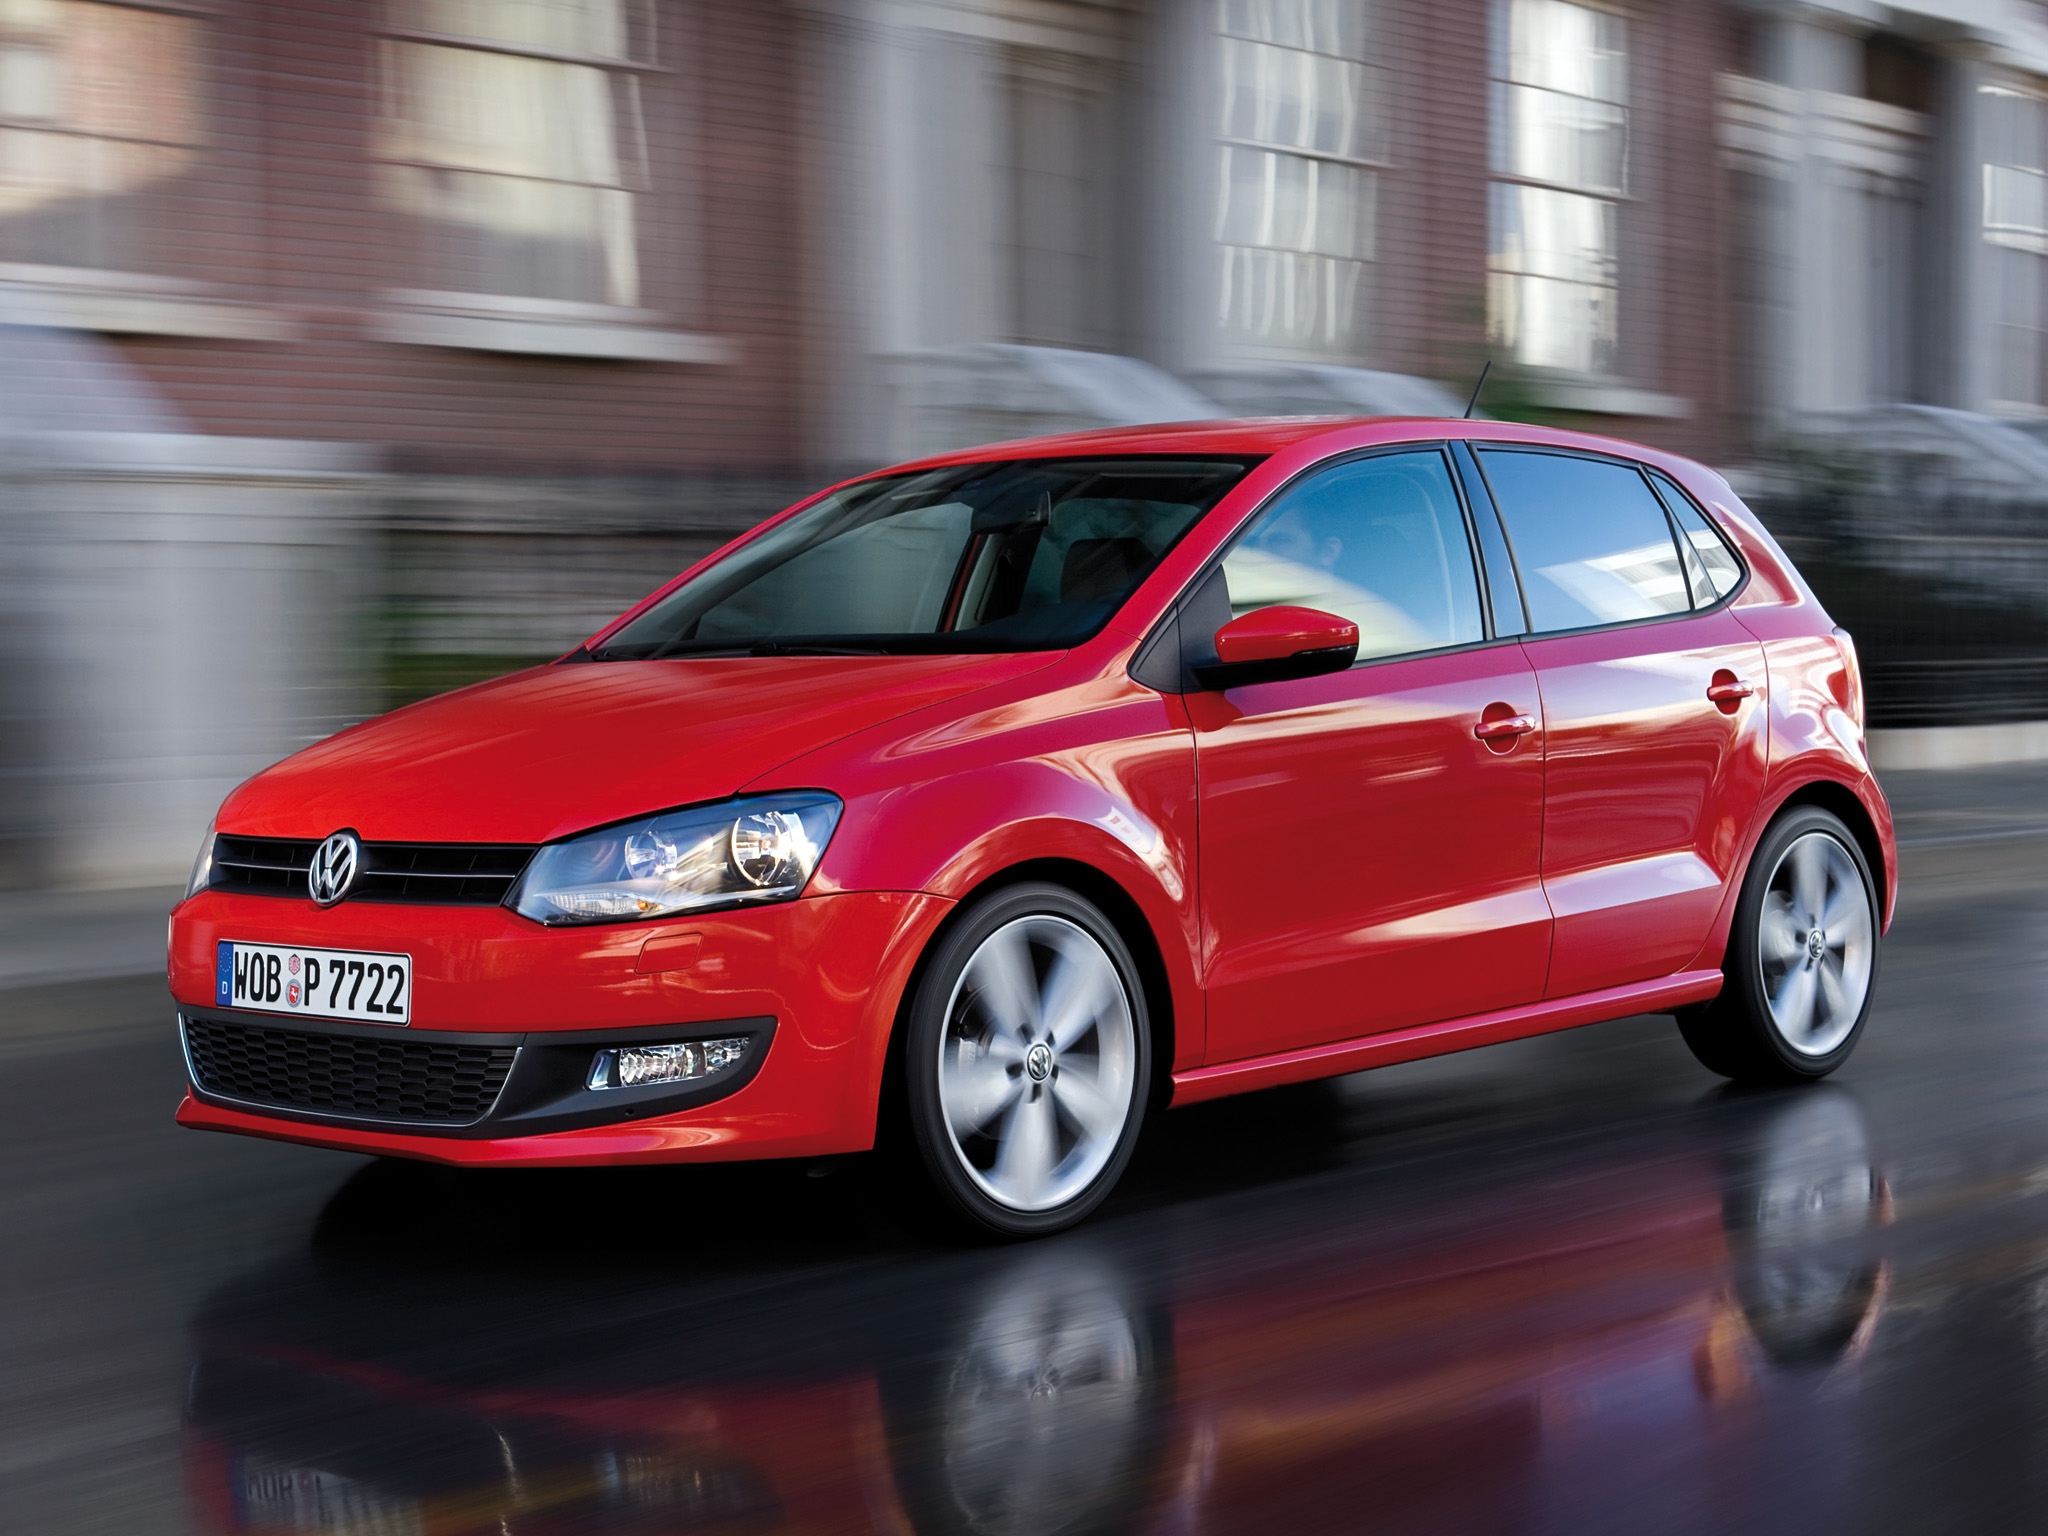 Volkswagen Polo Wallpapers Images Photos Pictures Backgrounds